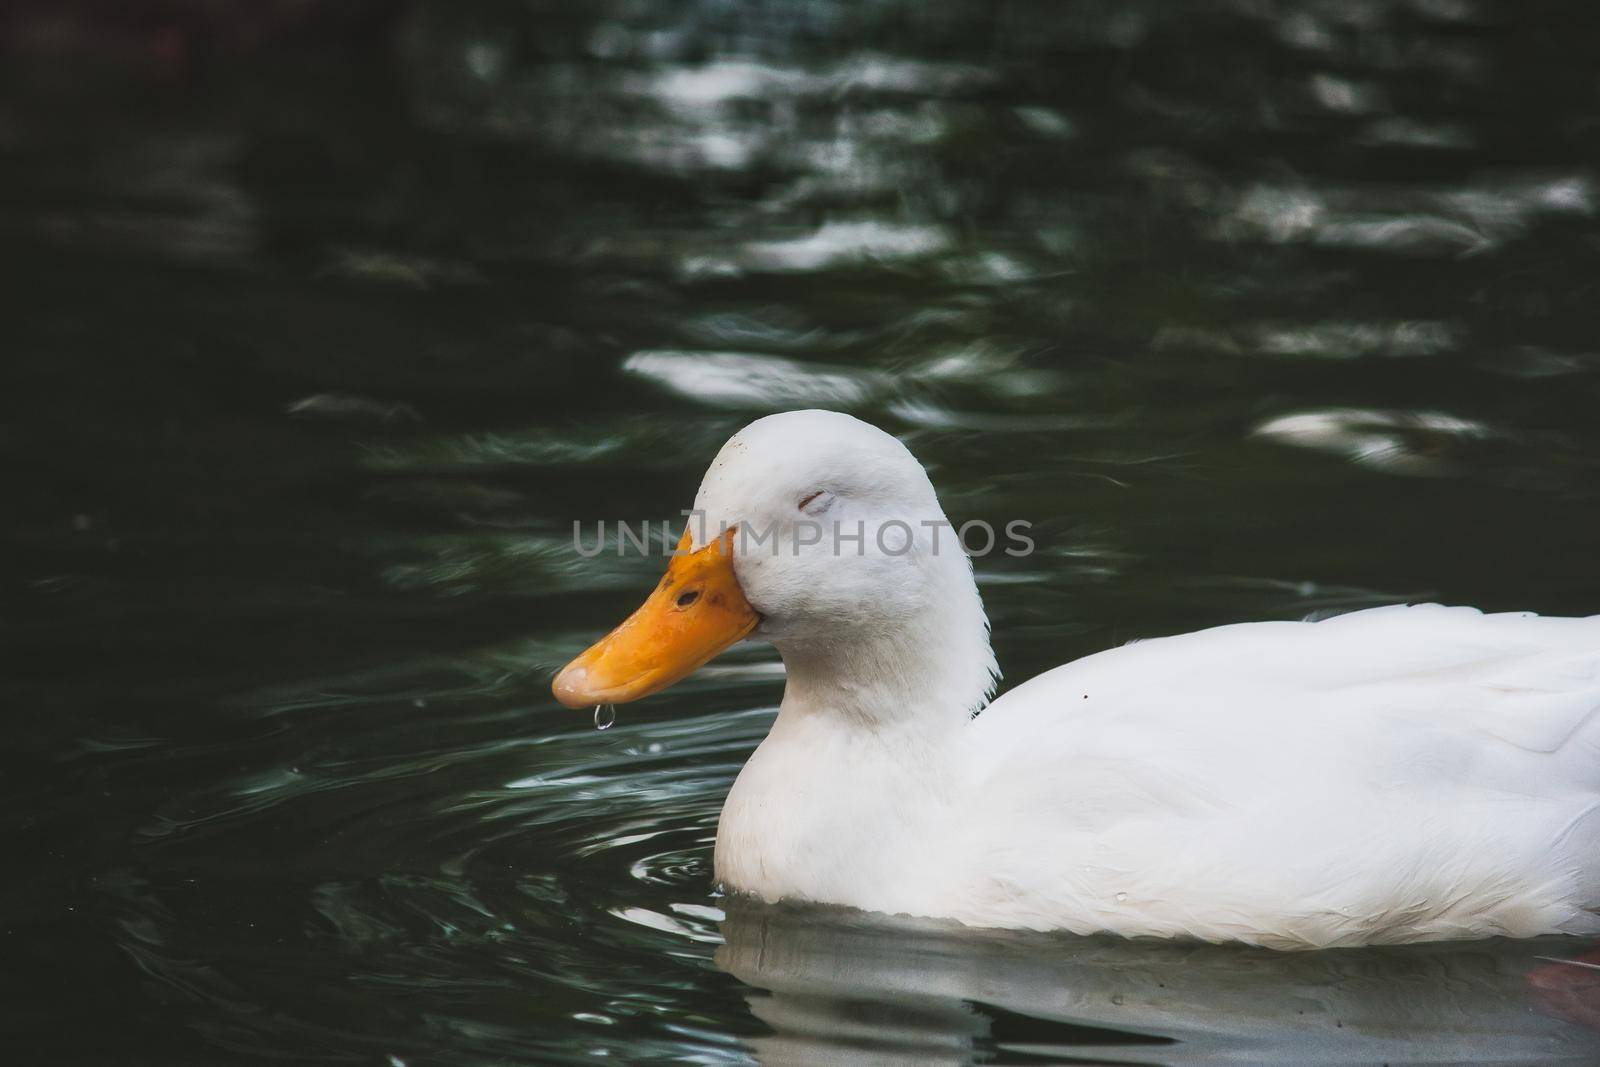 Cute white duck floating on a green lake